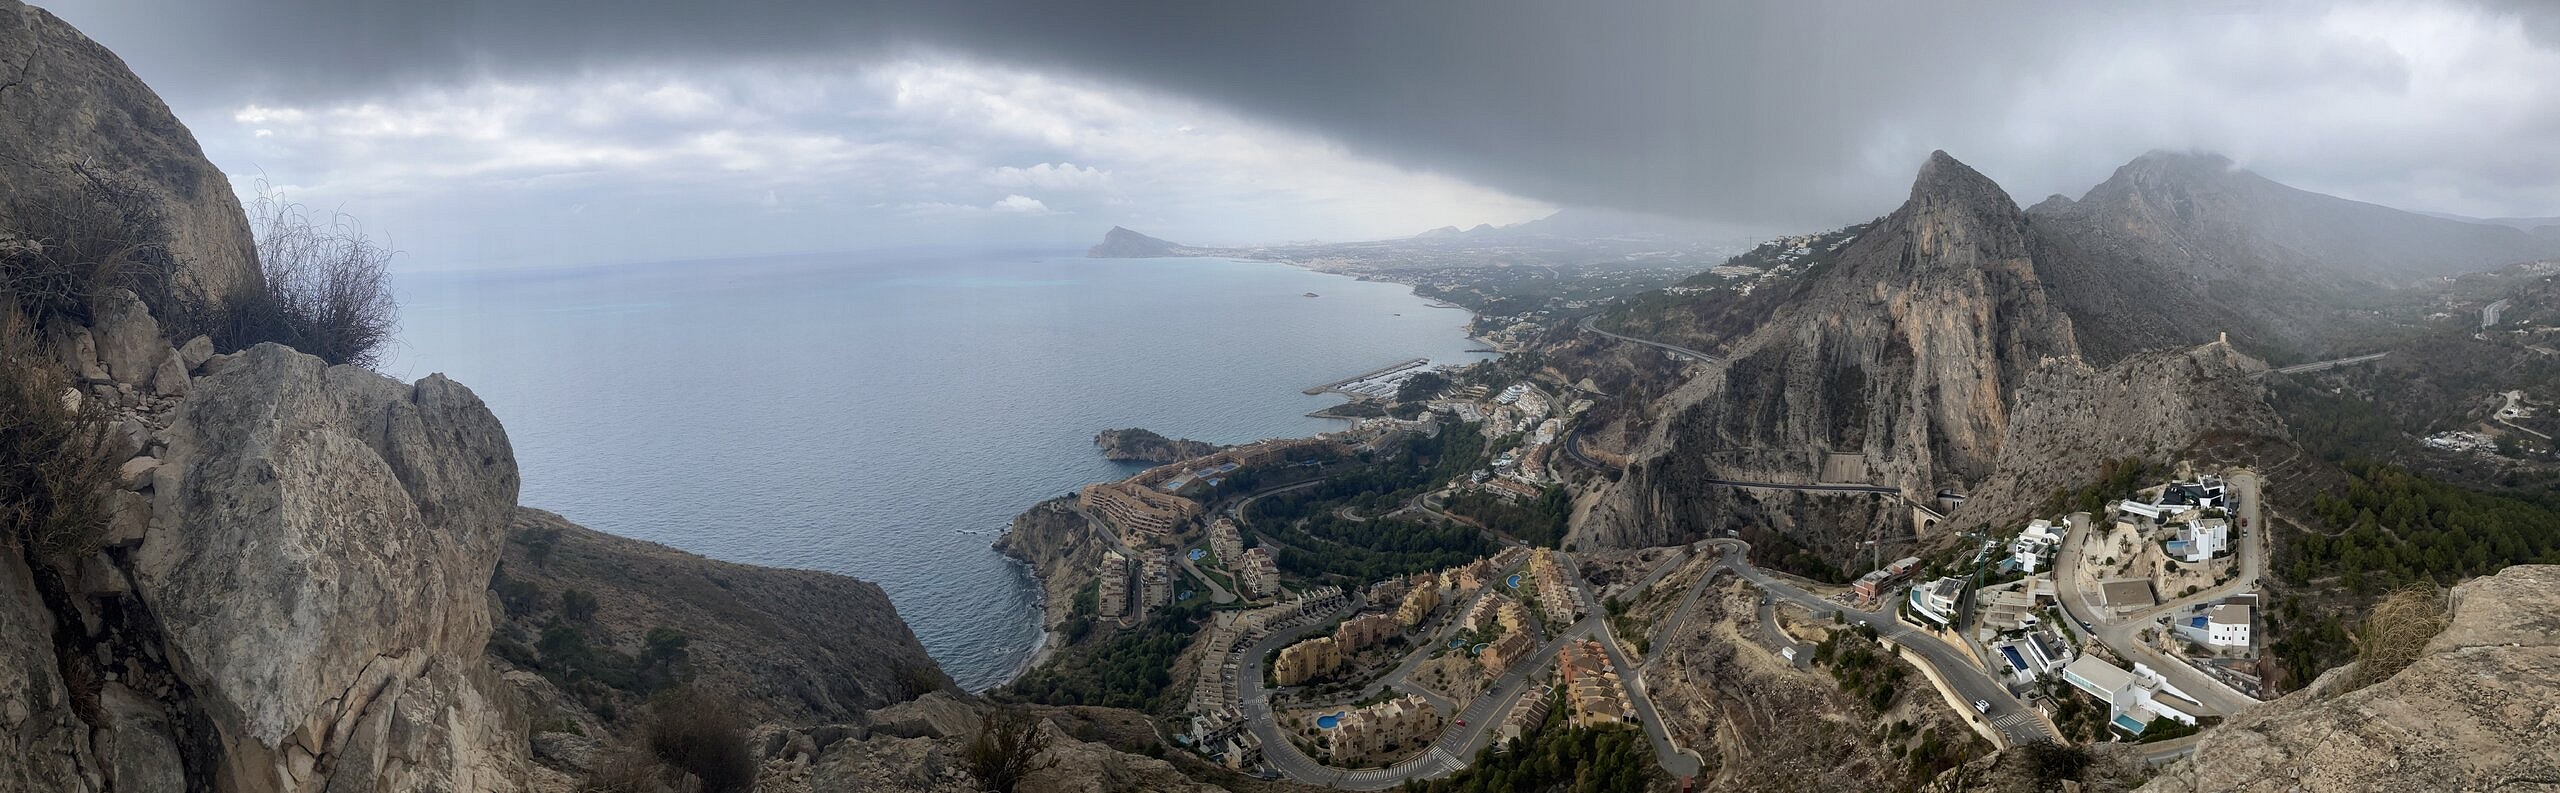 View from the top of Toix on a cloudy day   © MorganMcGlade